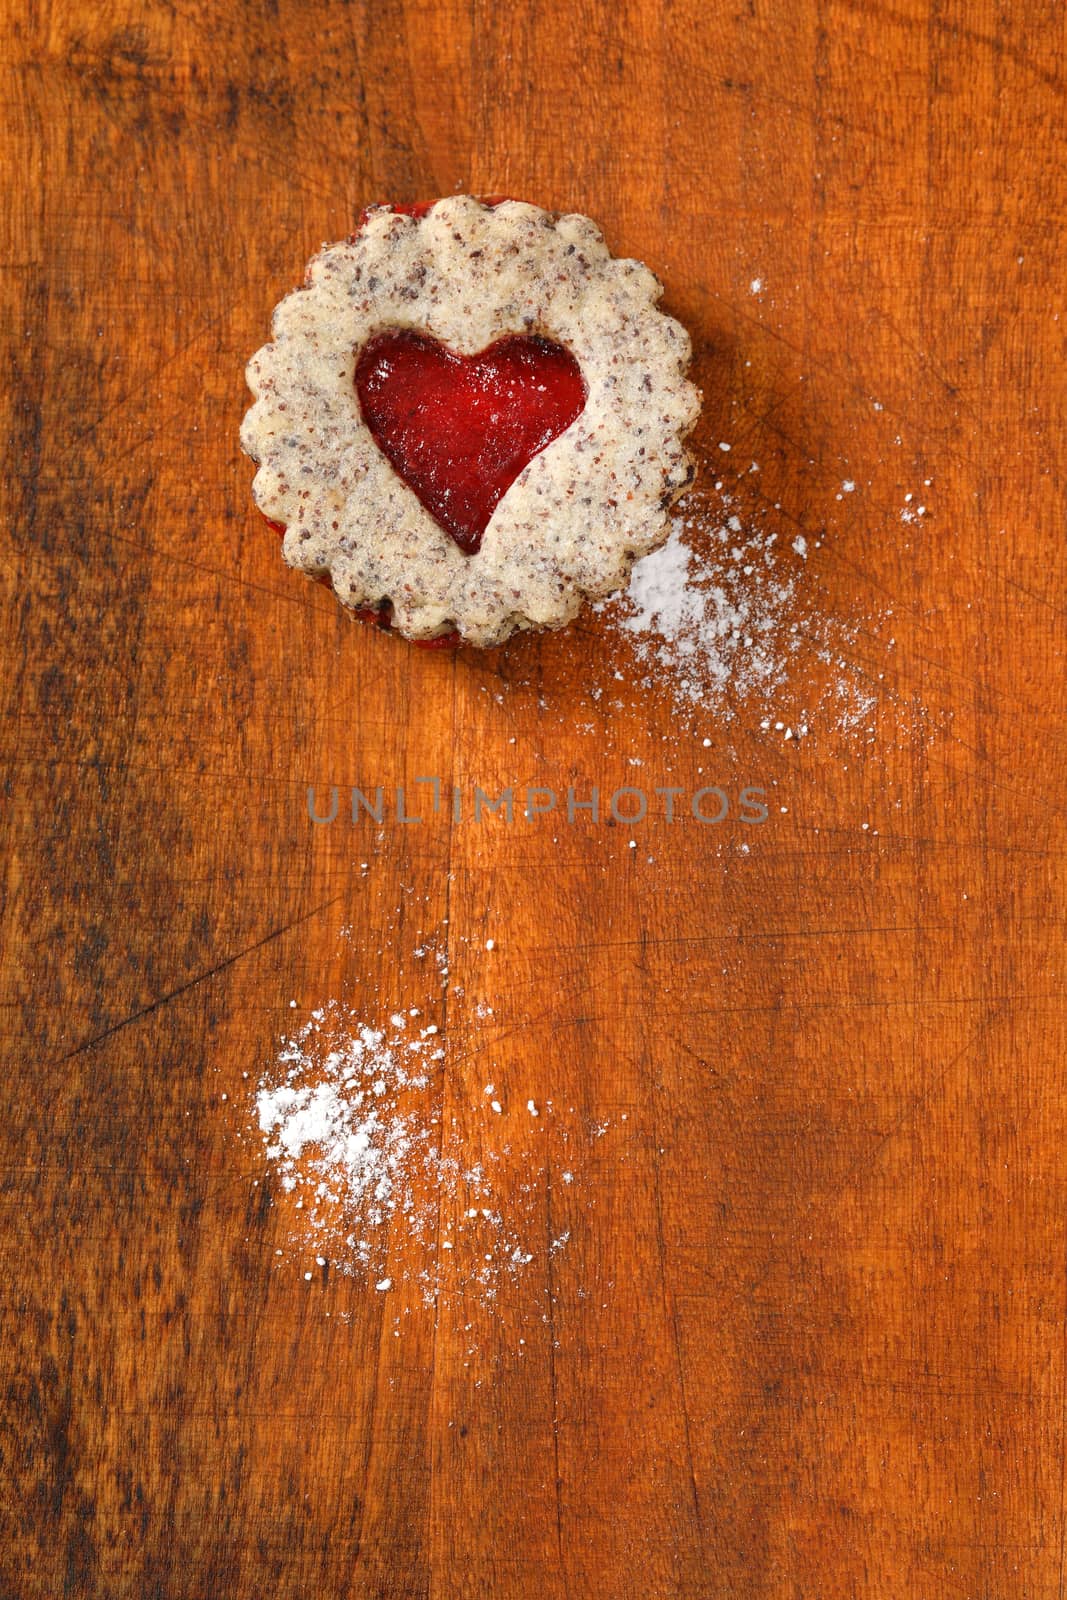 shortbread cookie with jam filling by Digifoodstock